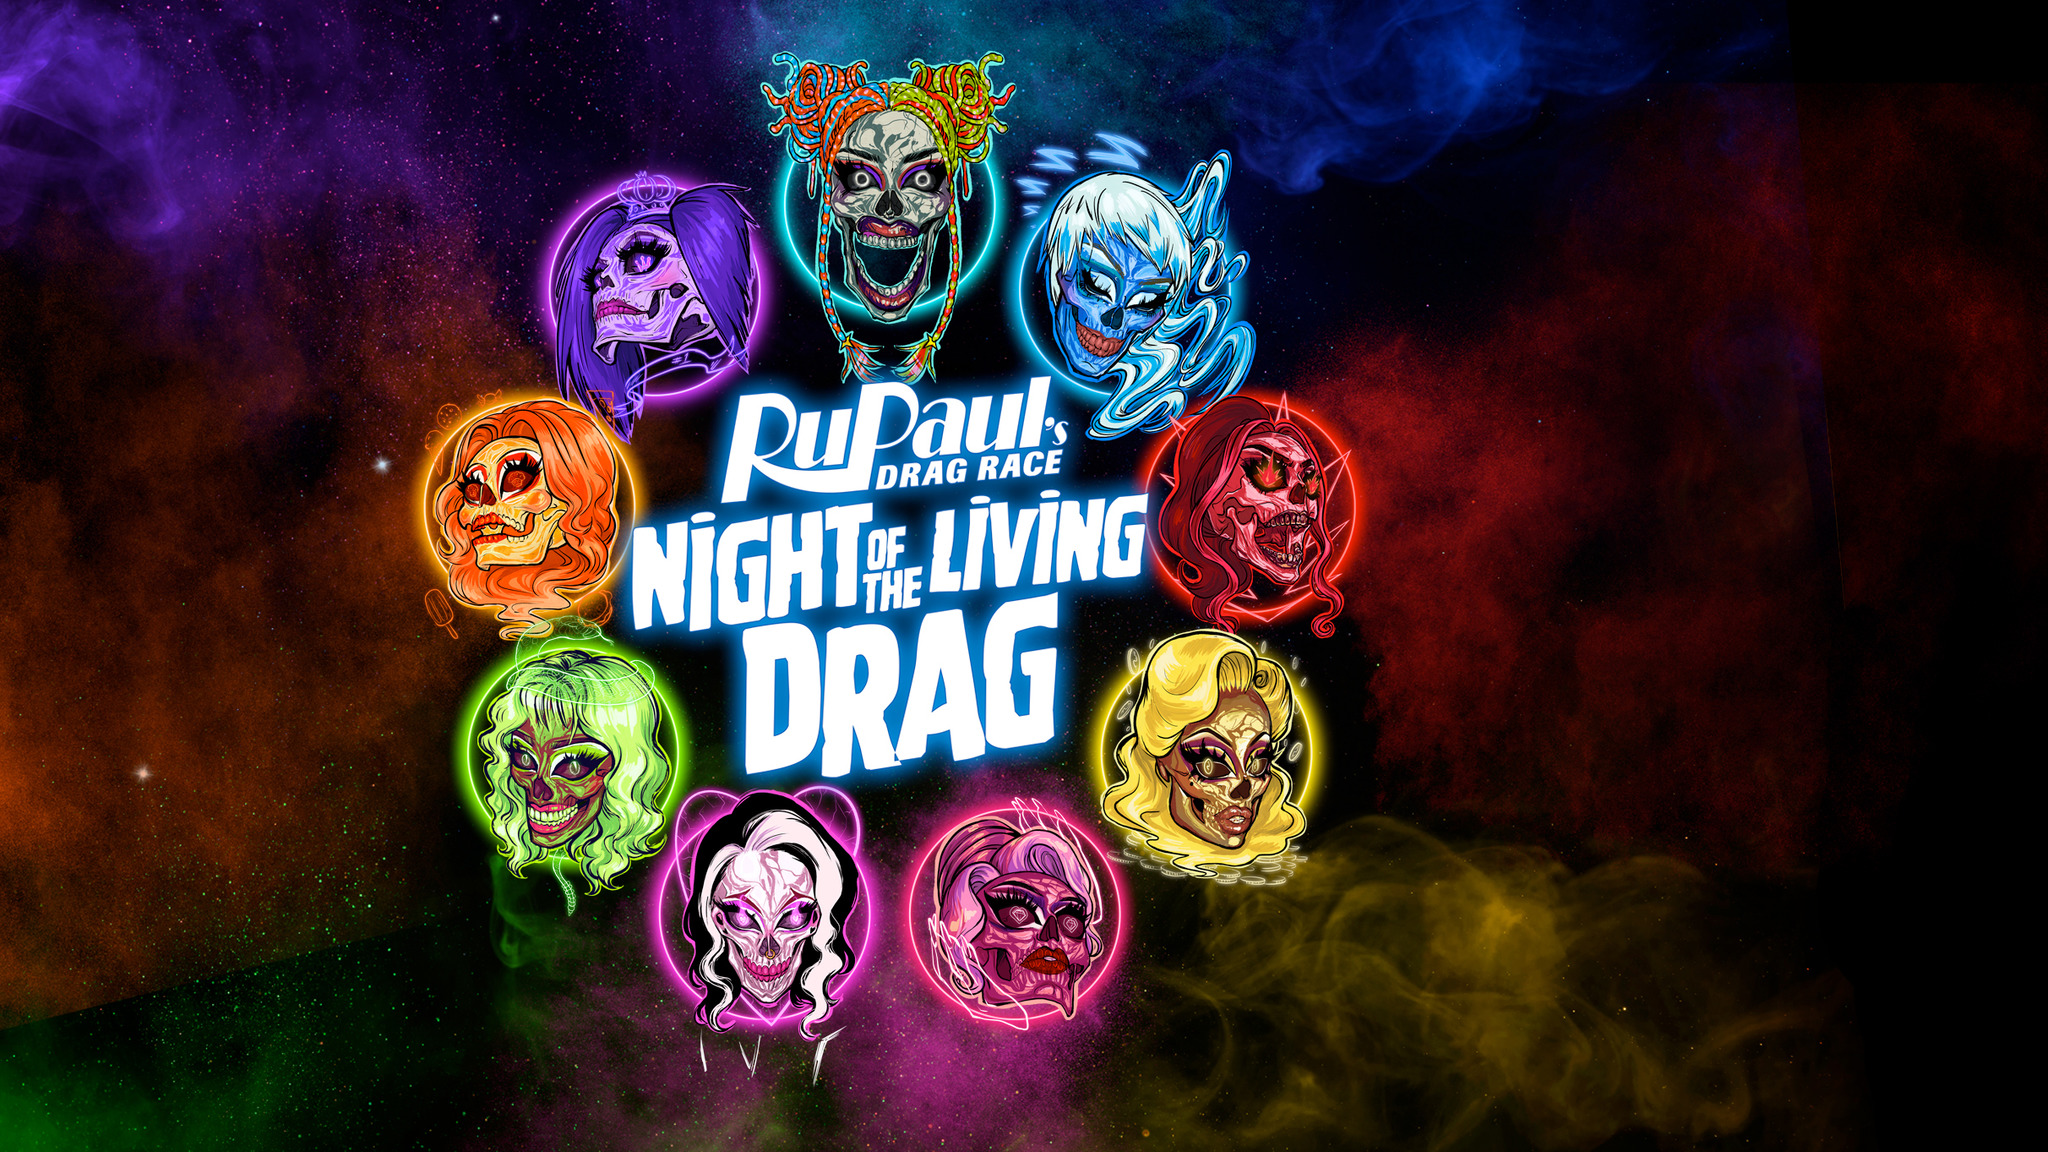 RuPaul's Drag Race Night of the Living Drag Tickets Event Dates